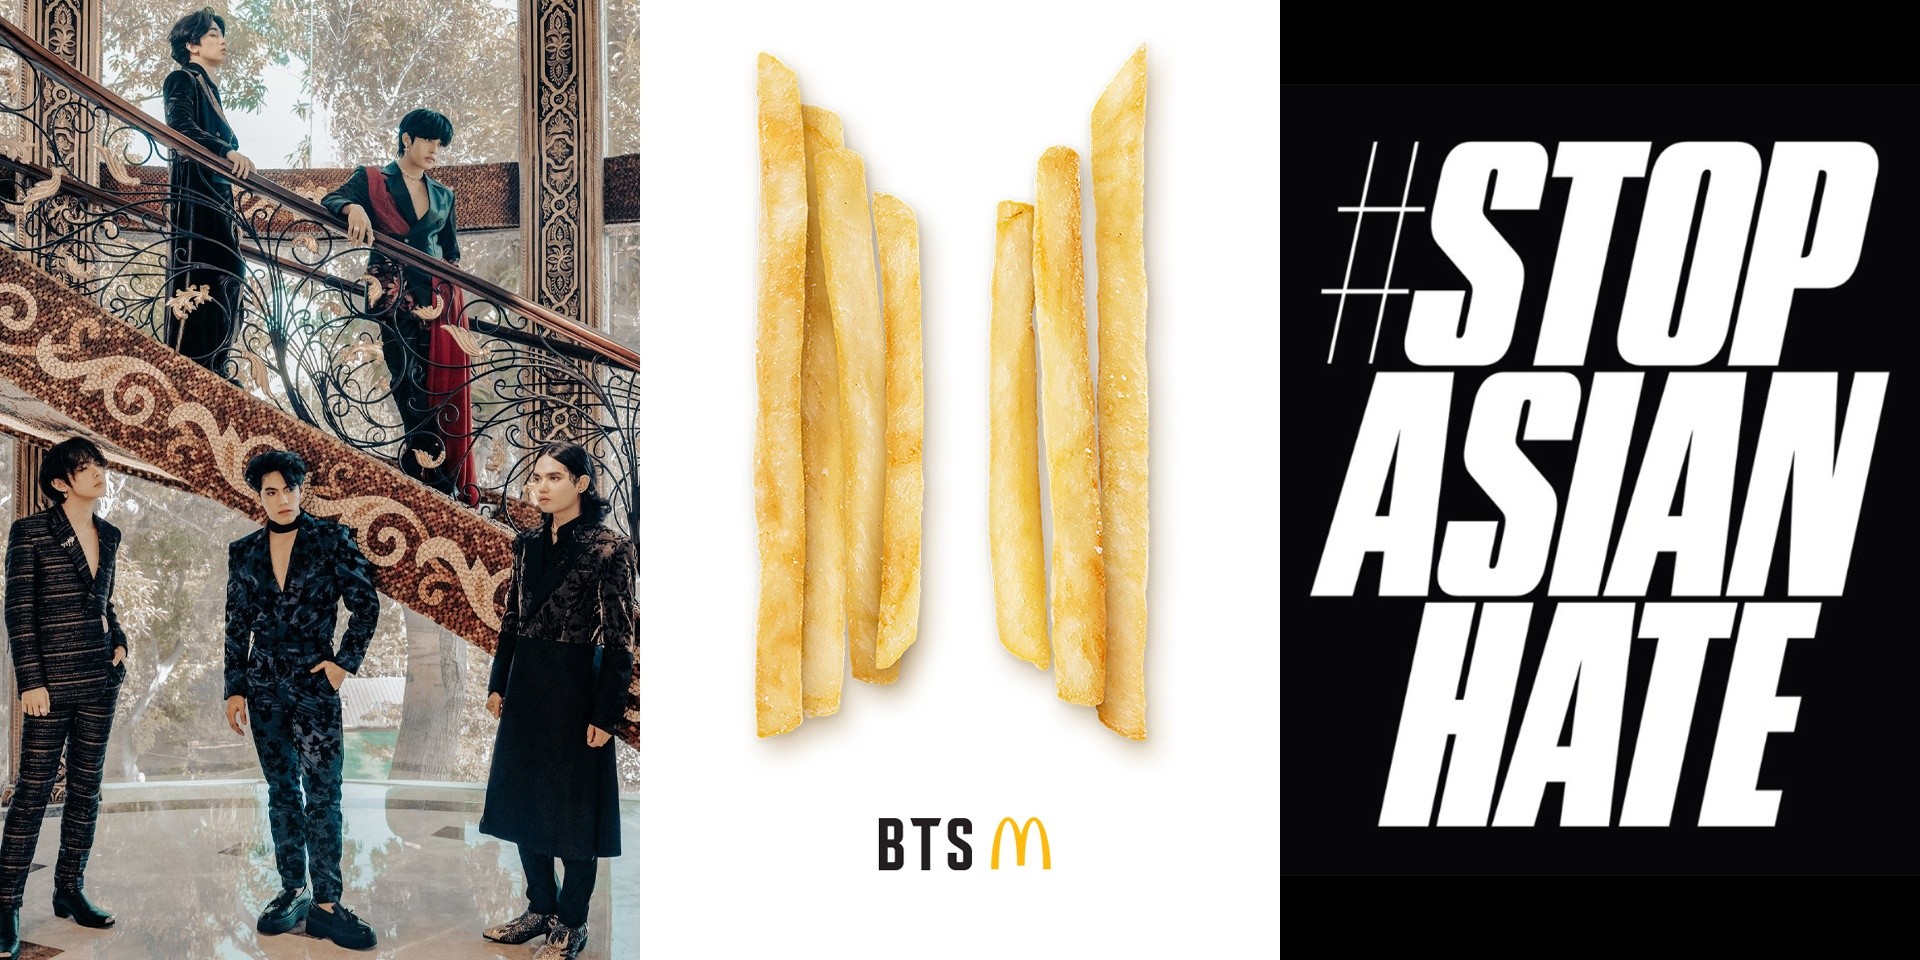 Twitter Philippines shares top 10 hashtags for 2021 so far – SB19, BTS Meal, #StopAsianHate, and more